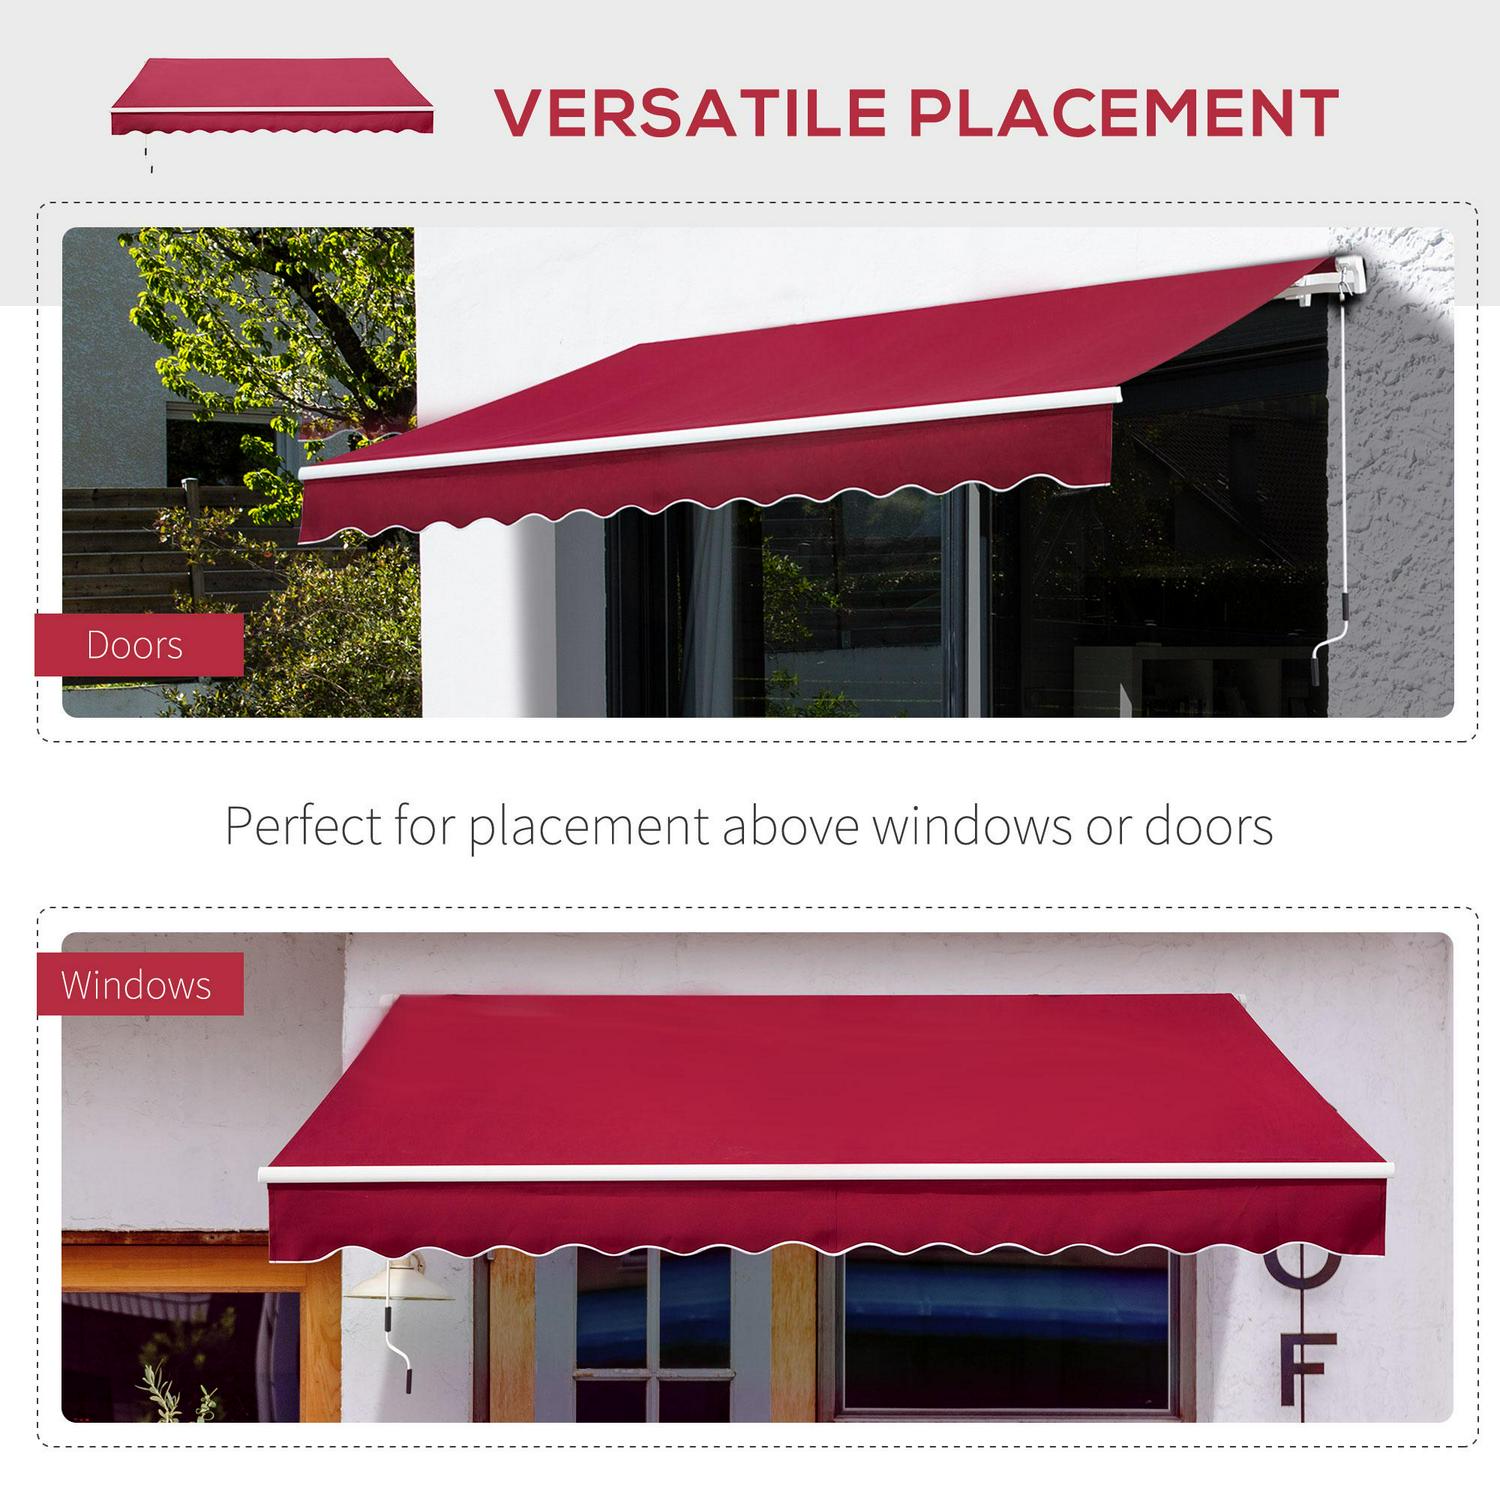 Manual Awning Canopy Retractable Shade Shelter For Garden Patio